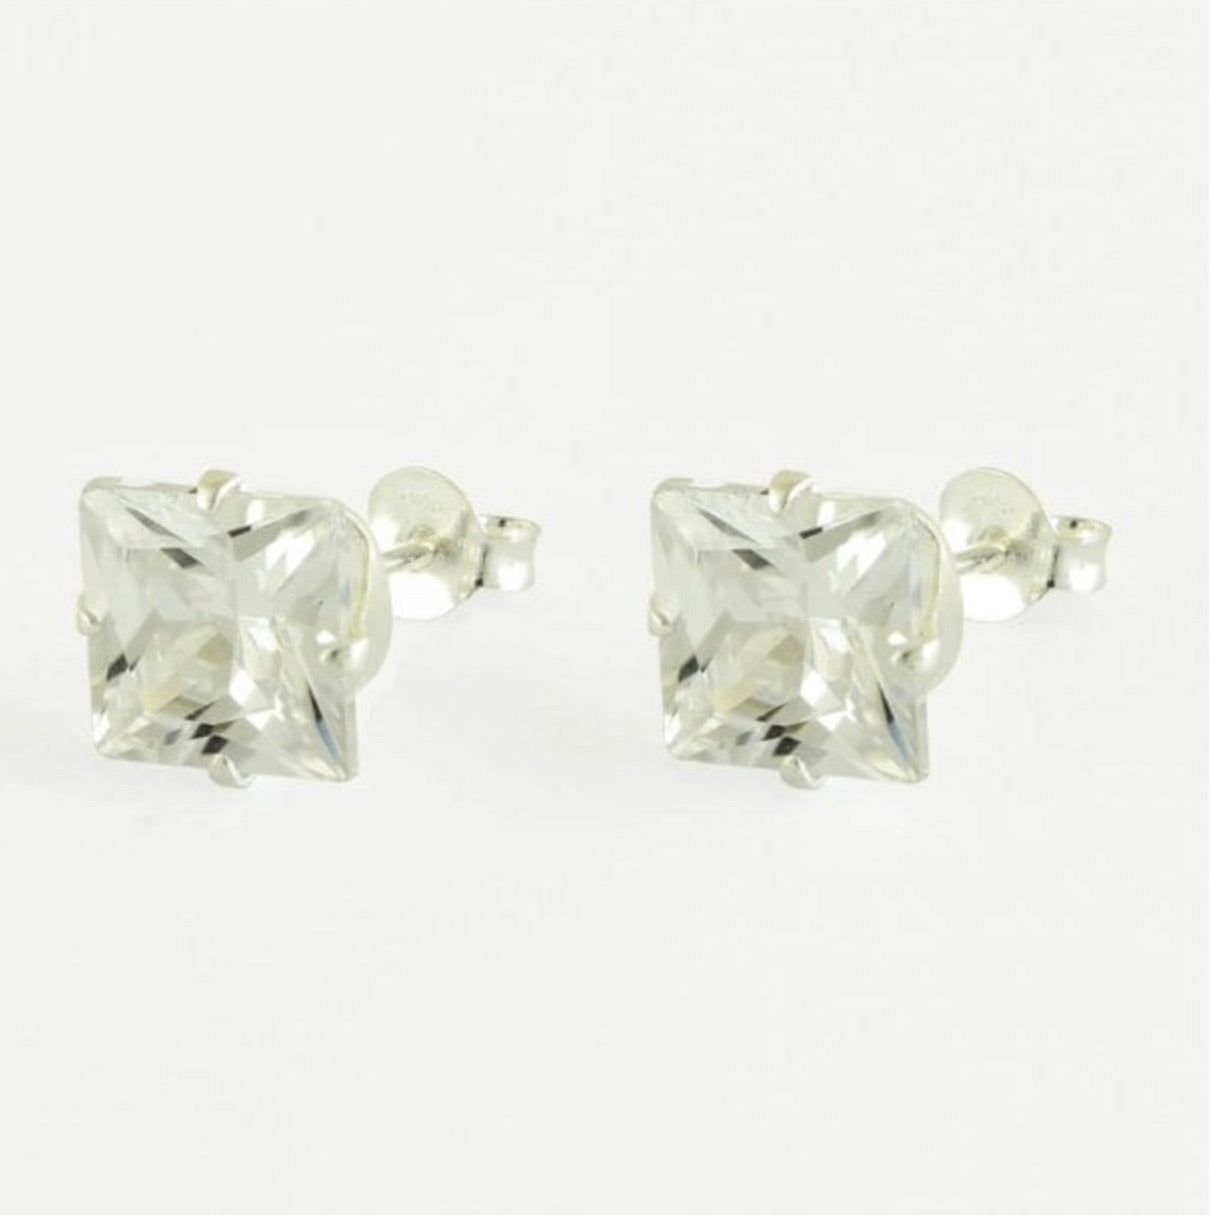 Square CZ Silver Ear Stud Earrings Crumble and Core   